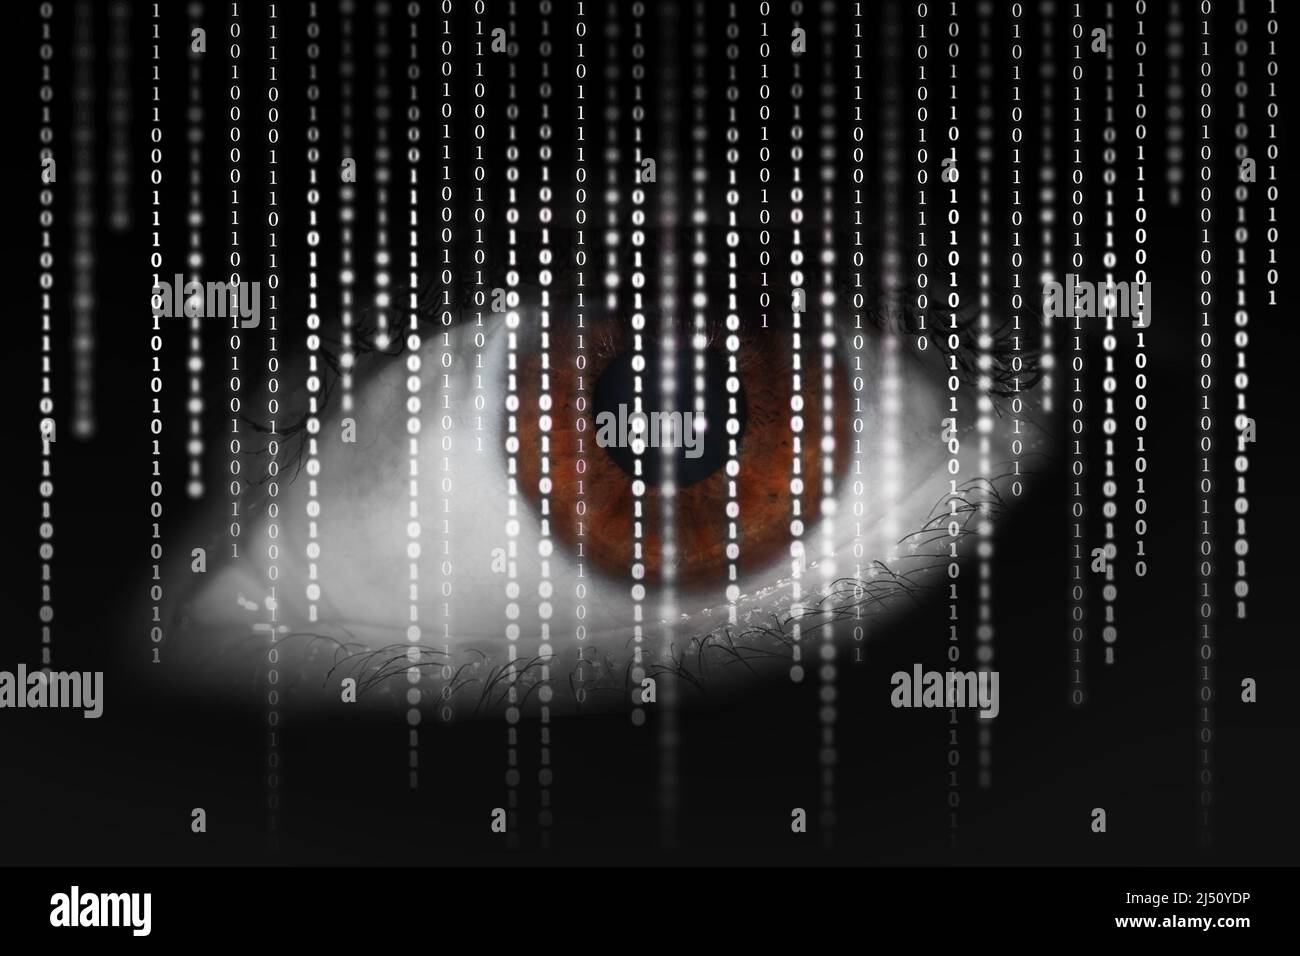 An eye with a brown pupil against a background of a dark cloud and white numbers, minimalism. Internet surveillance concept. Darknet concept. Stock Photo